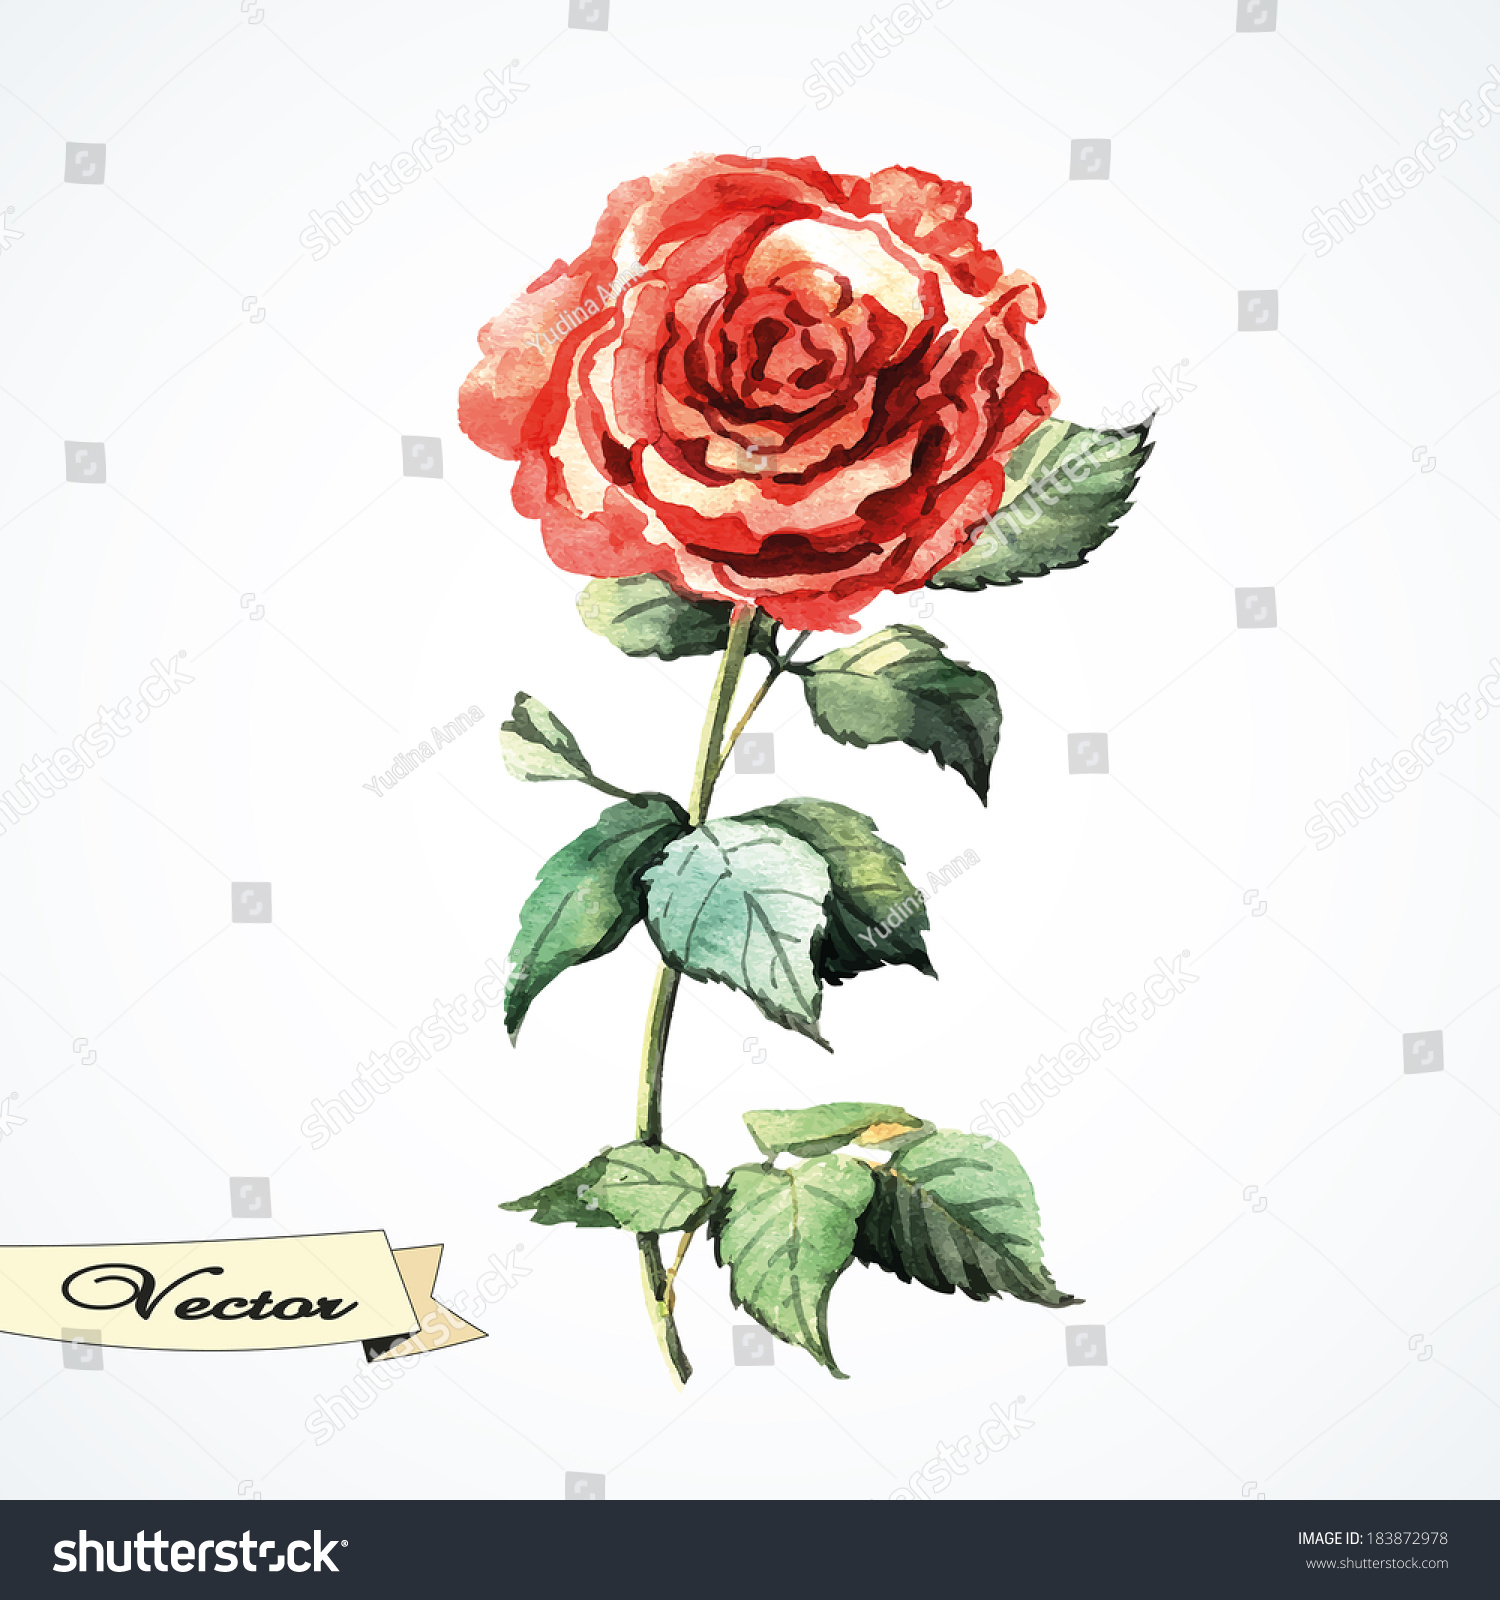 Vector Watercolor Red Rose Illustration Greeting Stock Vector (Royalty ...